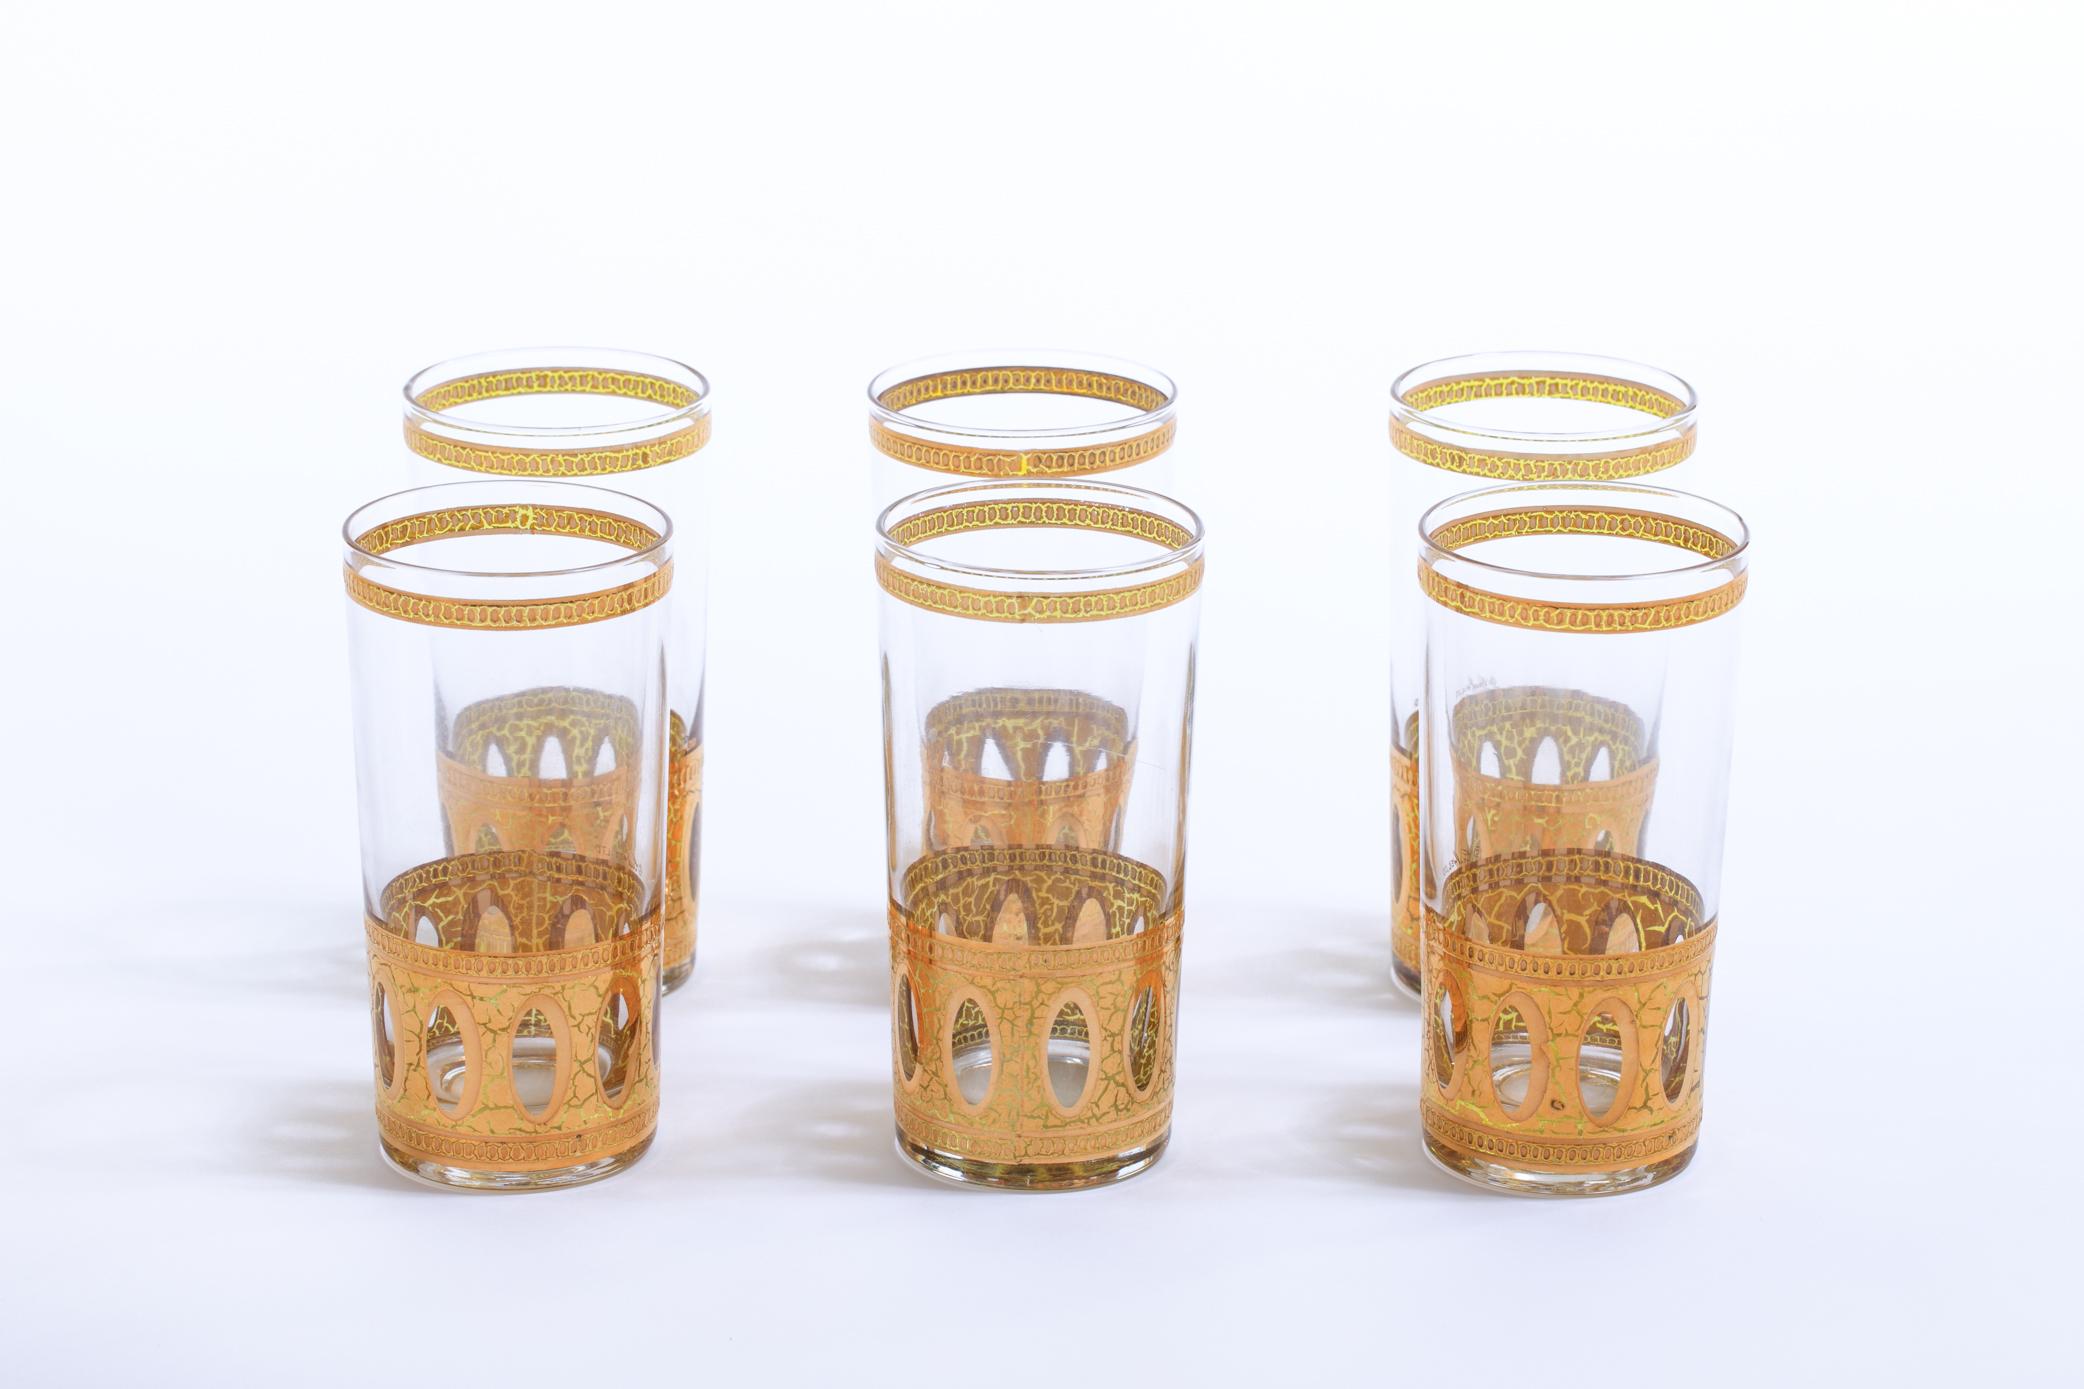 Beautiful set of 8 vintage highball / cocktail glasses in mint condition (never used), featuring a Classic 22-karat gold midcentury pattern. Shiny, festive, mod! A great gift or addition to your bar or bar cart, circa 1965. Want to see more